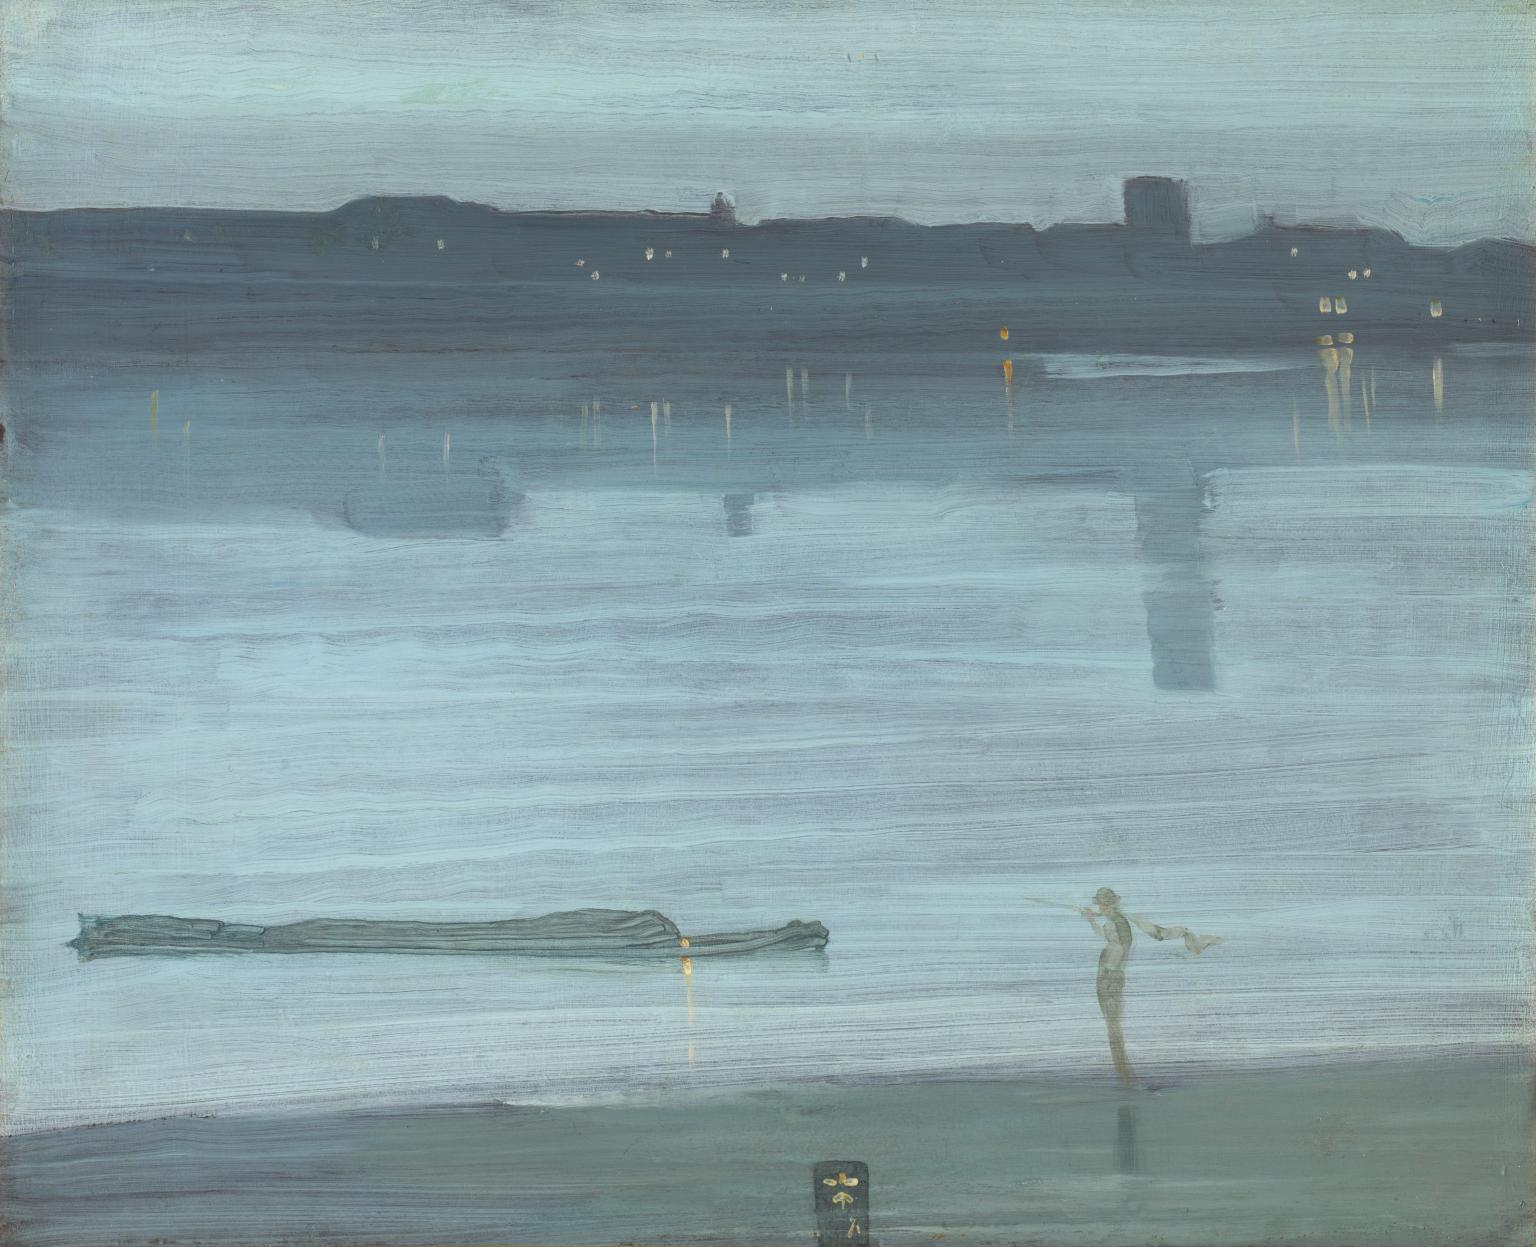 Nocturne: Blue and Silver - Chelsea 1871 by James Abbott McNeill Whistler 1834-1903